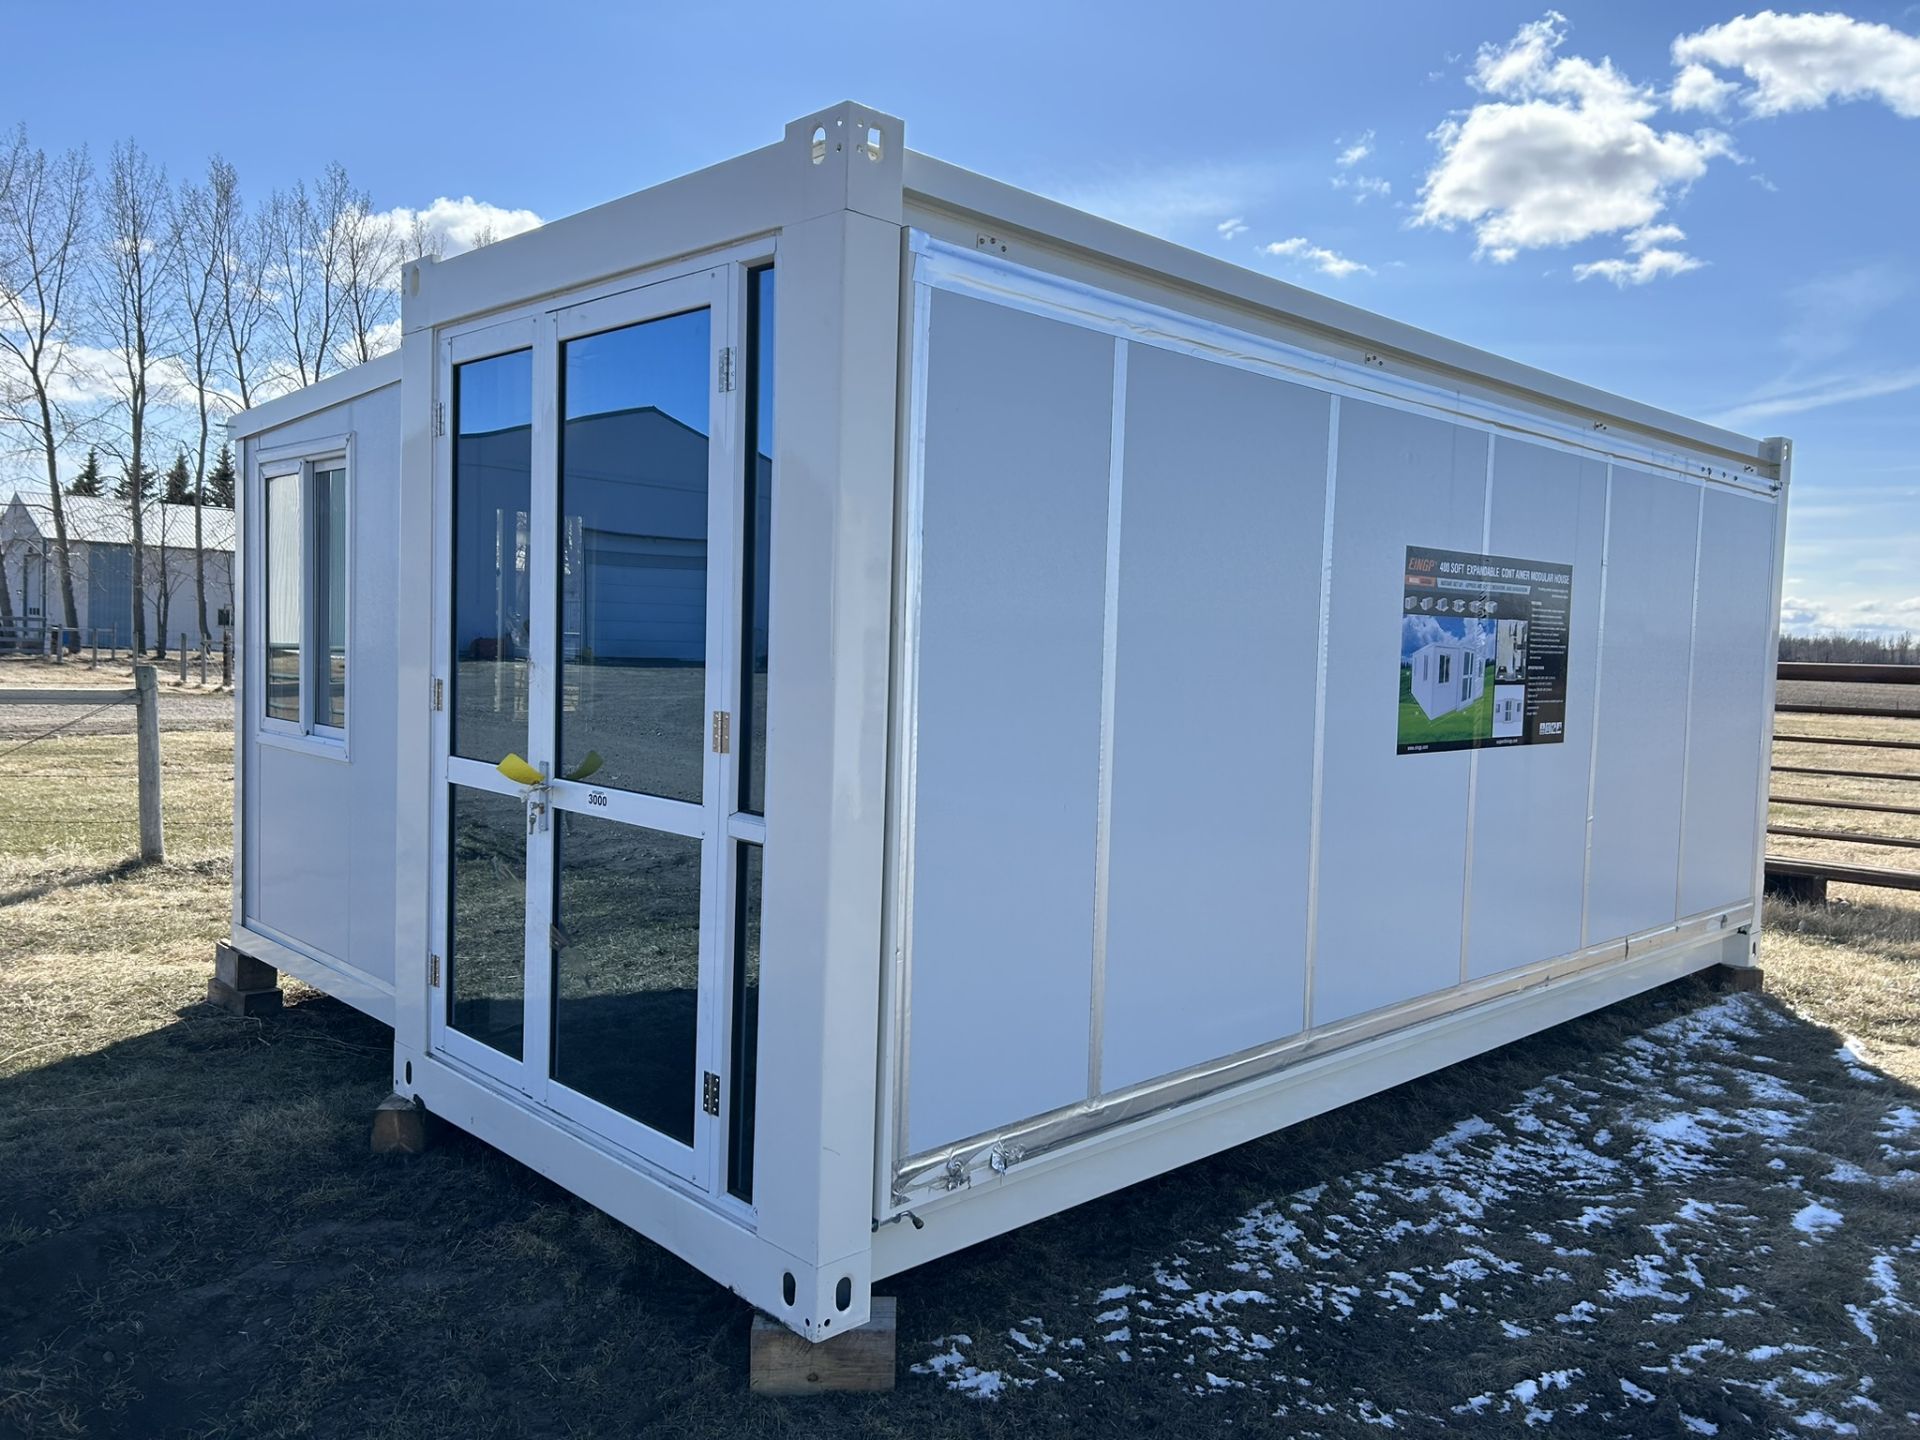 EINGP CG5800 400 SQFT EXPANDABLE CONTAINER MODULAR HOUSE, APPROX 400 SQFT. , 2-BEDROOM W/ WASHROOM - Image 5 of 12